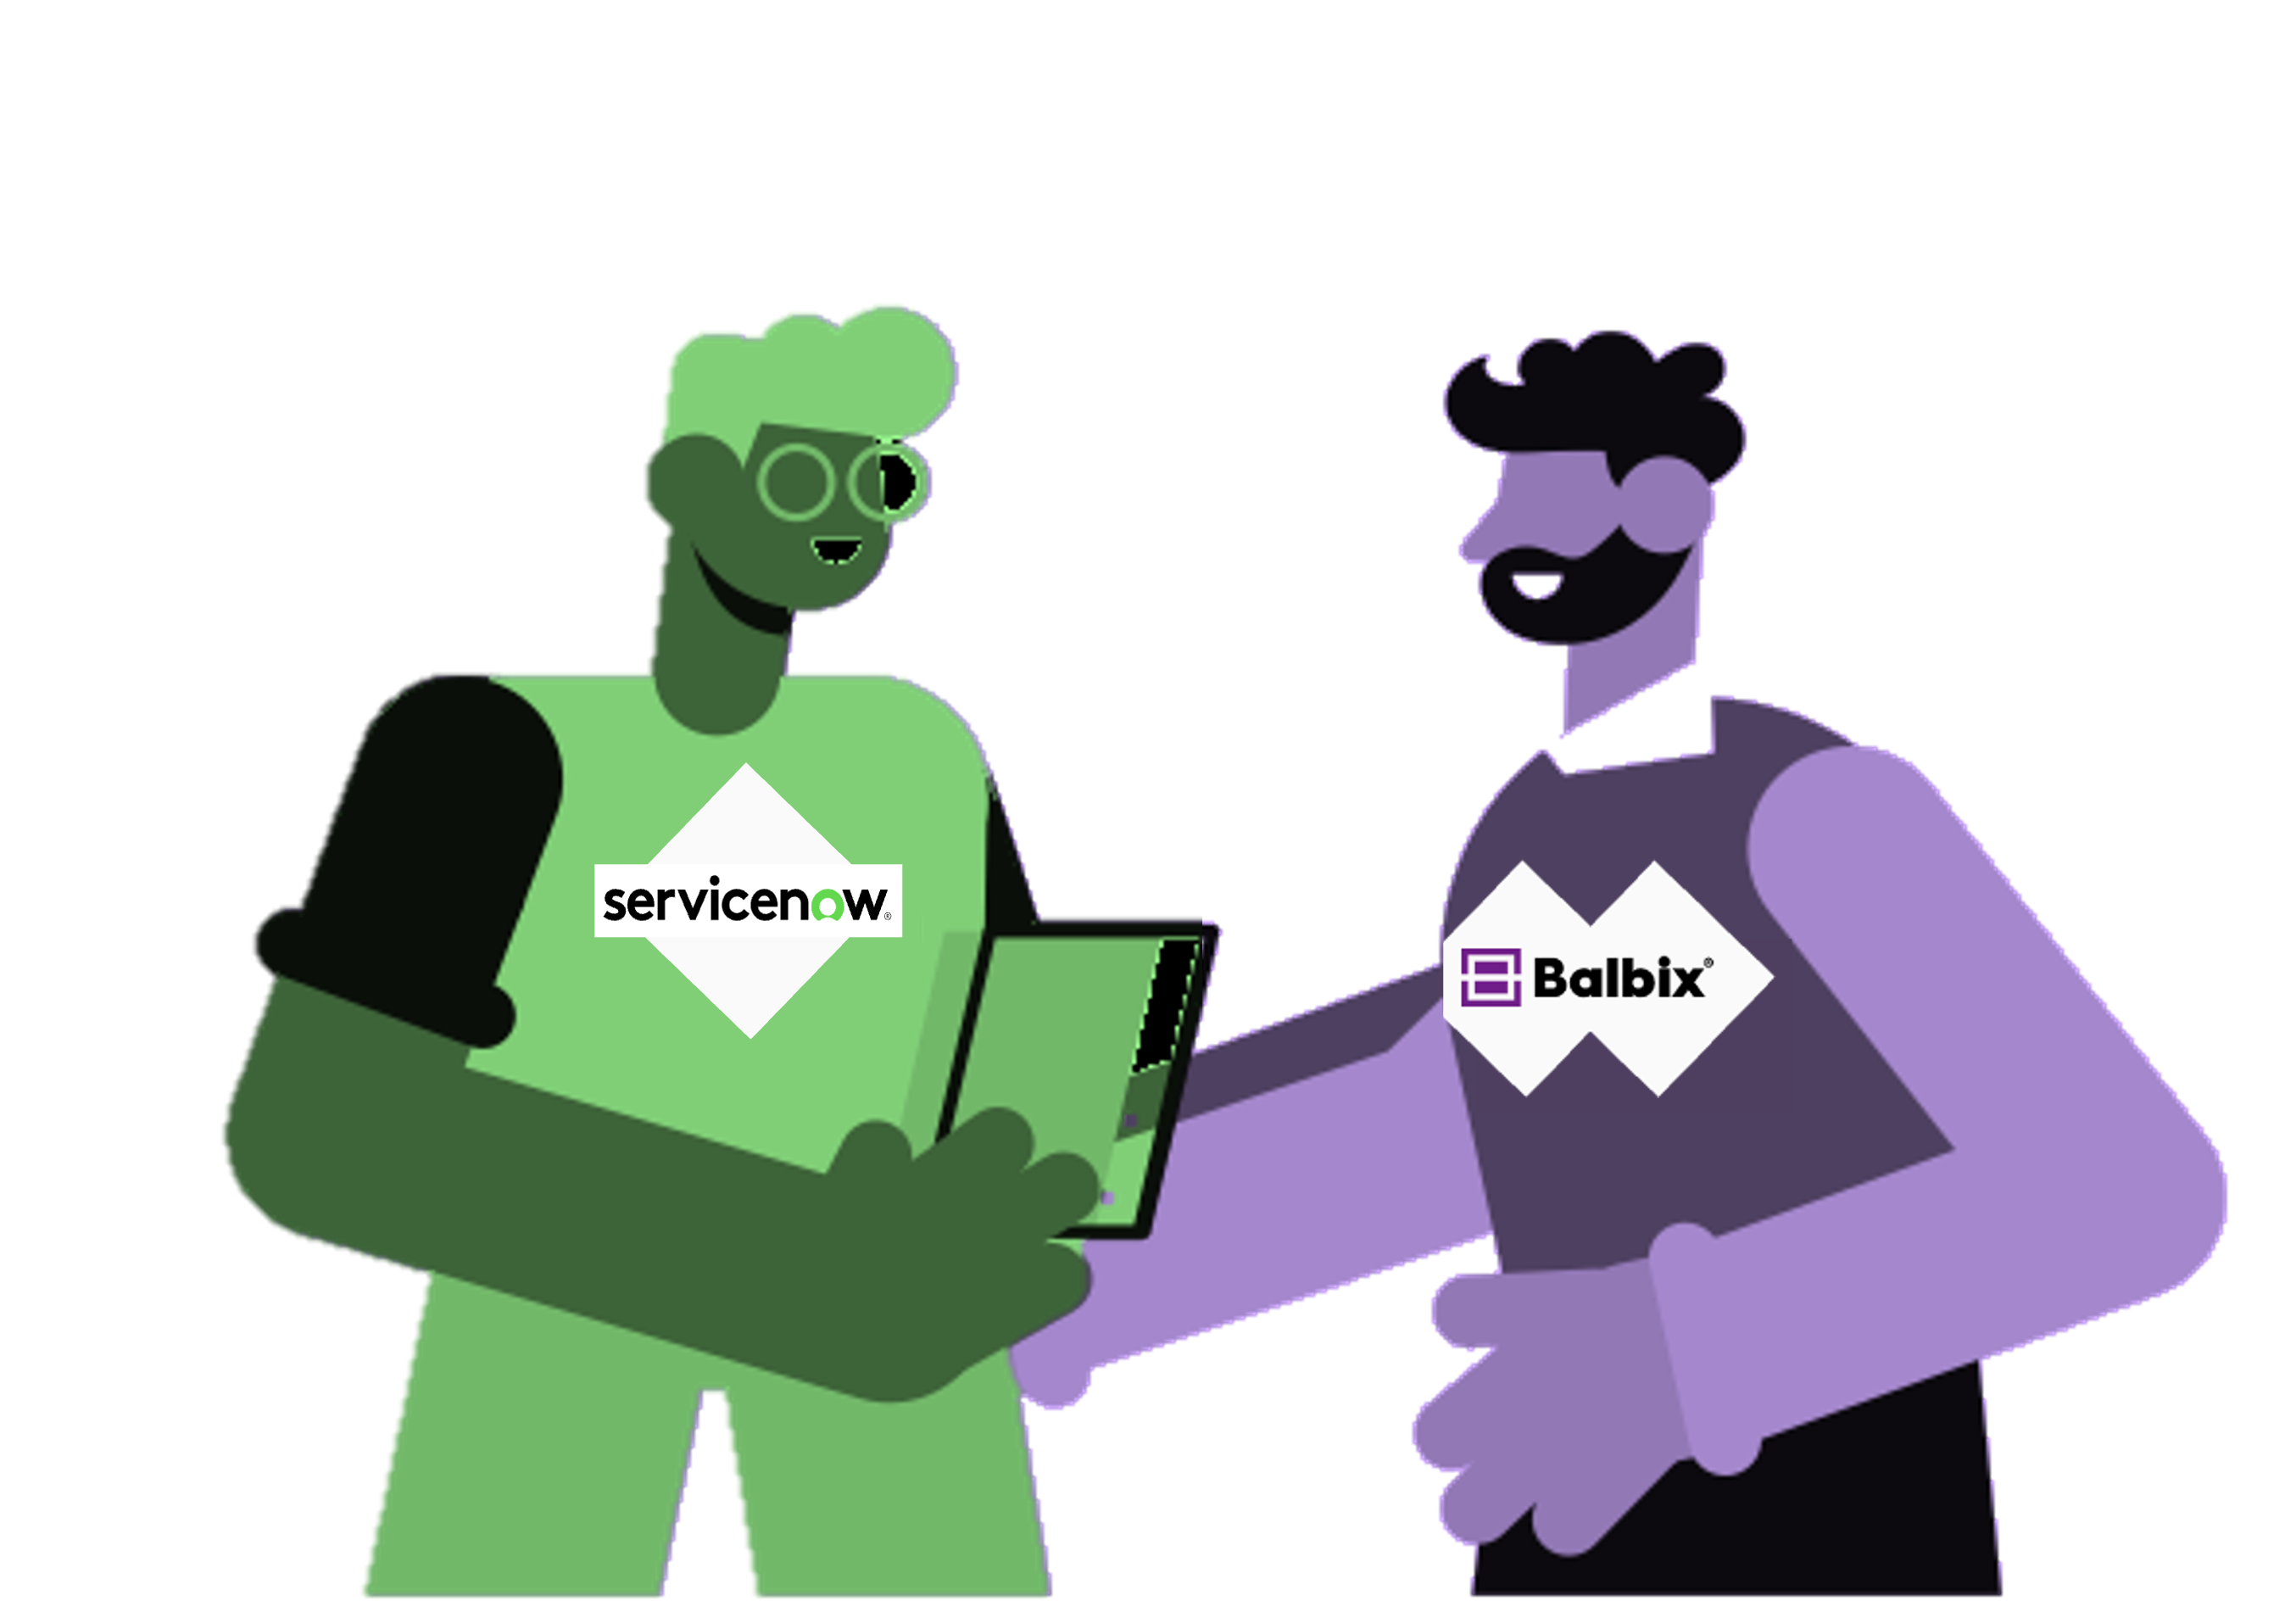 Two supeheroes have become buddies